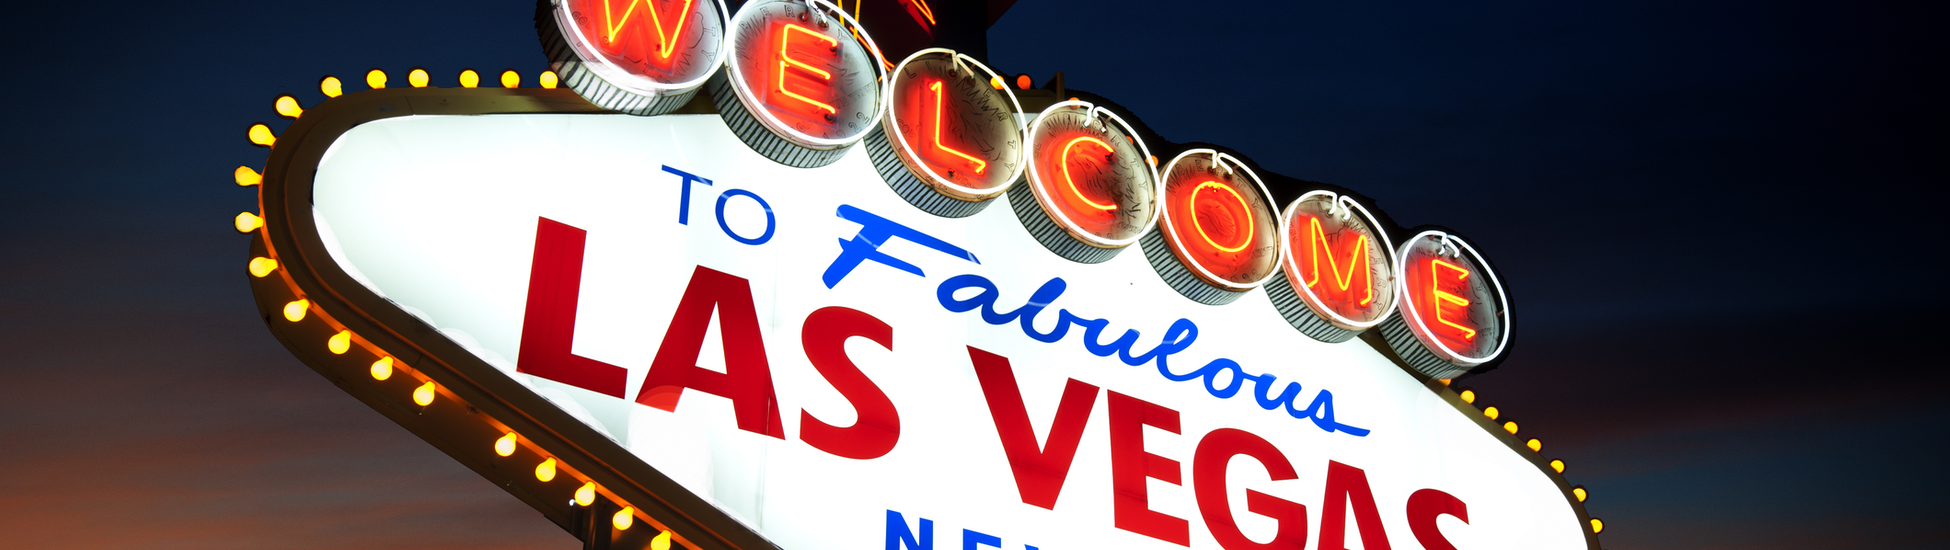 Image of the Welcome to Fabulous Las Vegas sign